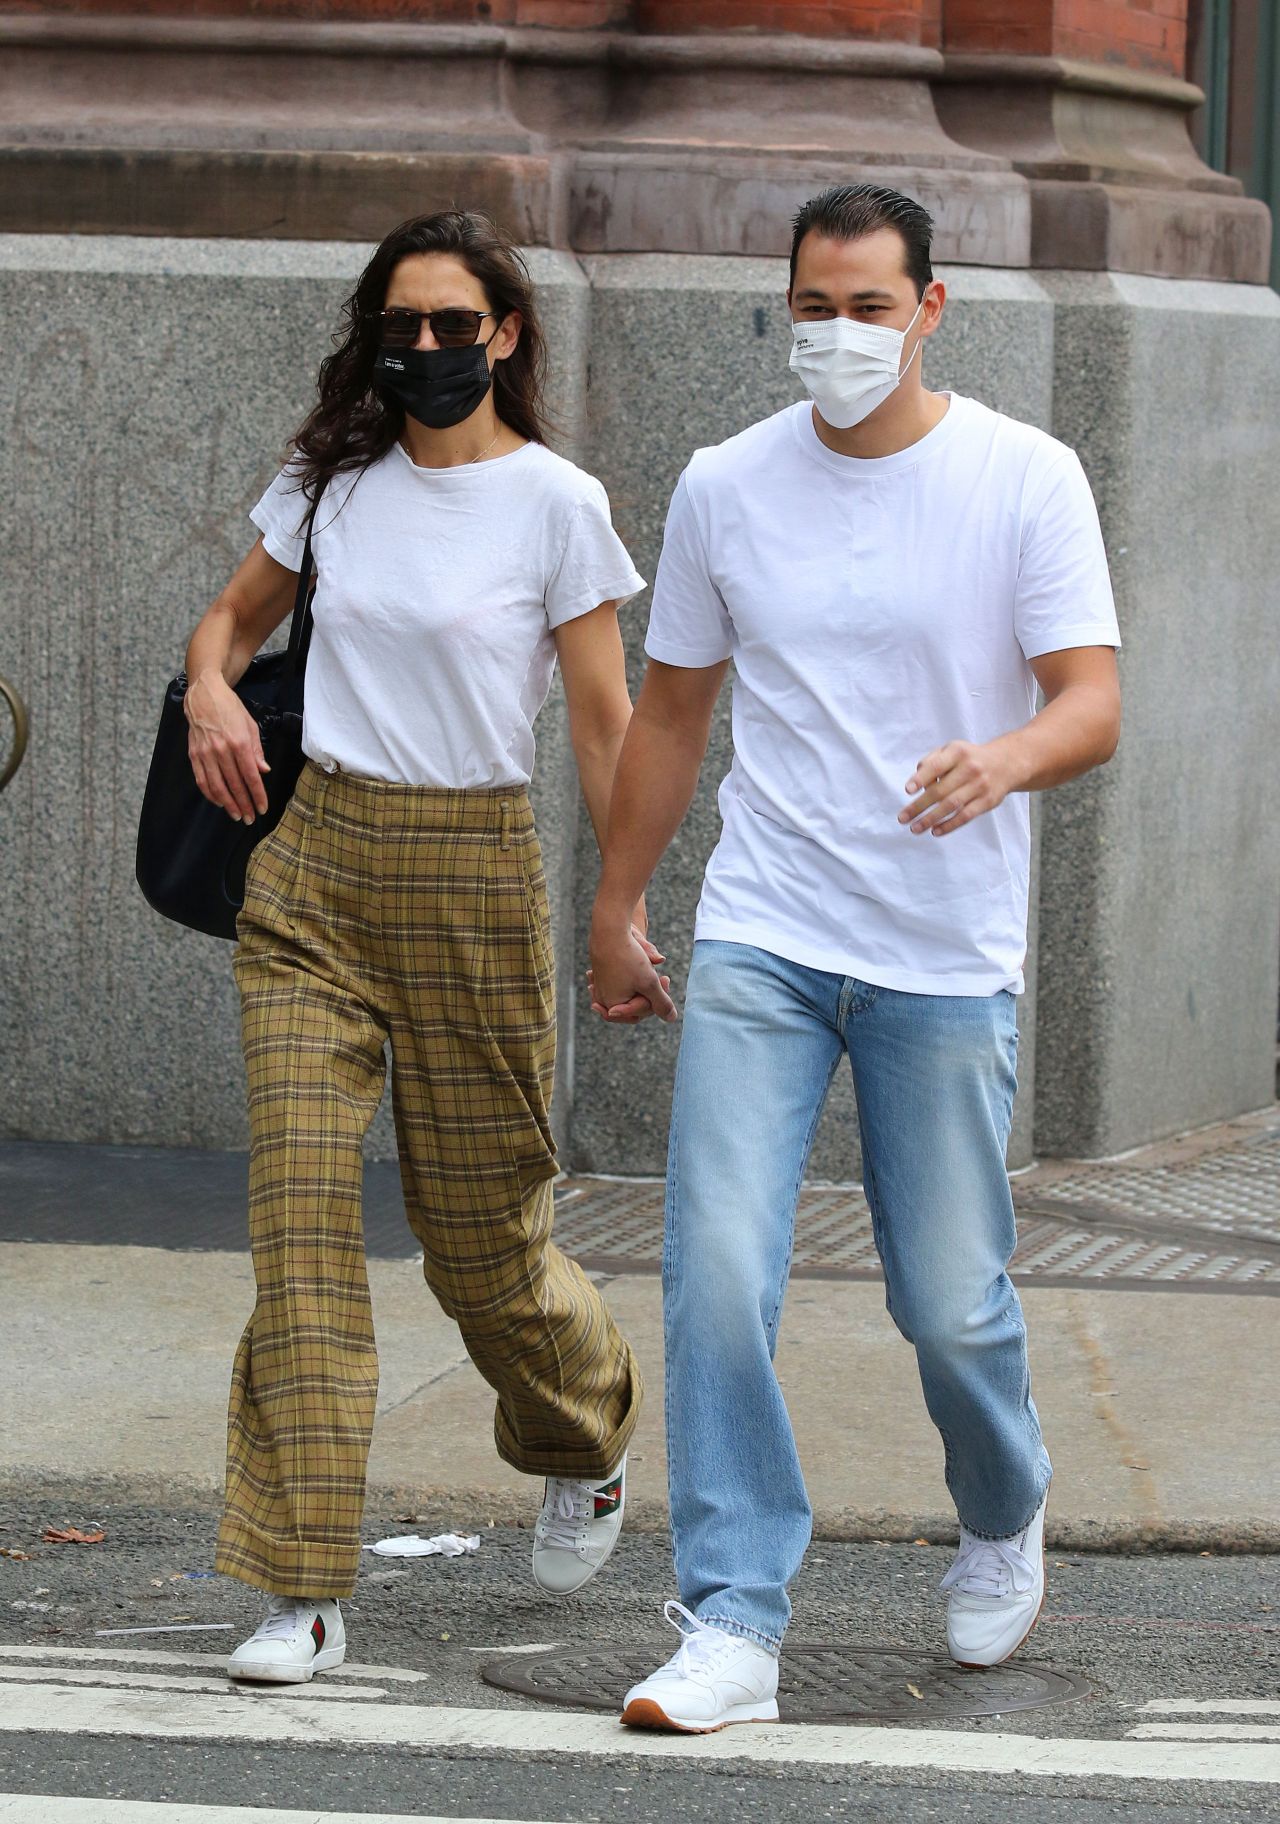 katie-holmes-and-emilio-vitolo-jr.-riding-the-downtown-subway-train-in-manhattan-10-01-2020-2.jpg